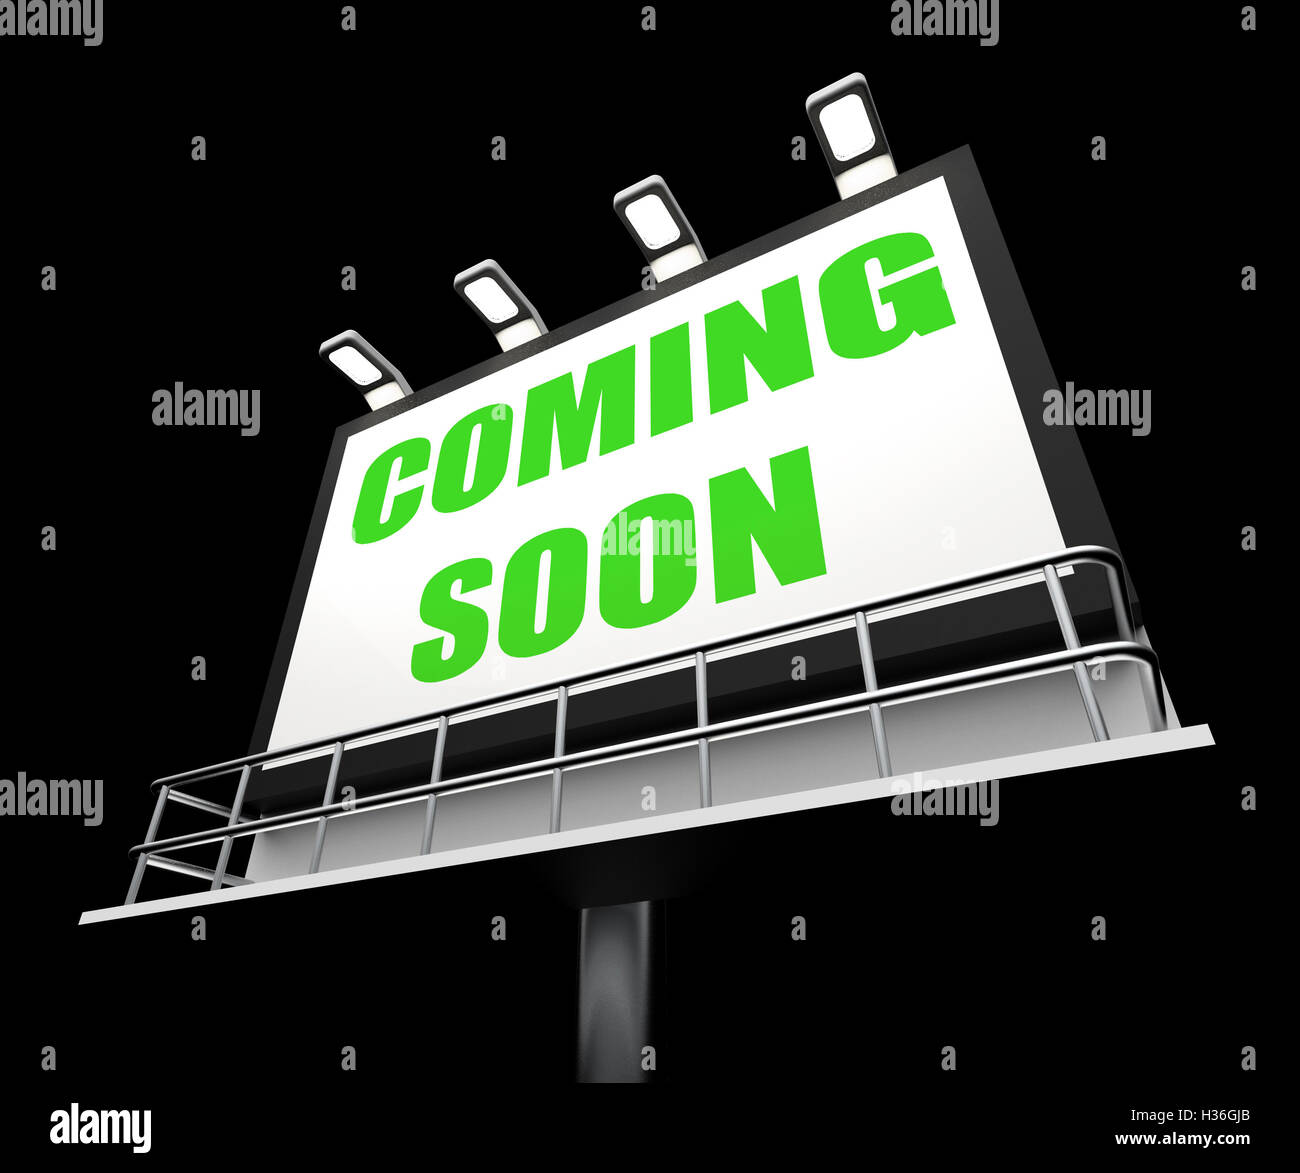 Coming Soon Media Sign Shows New or Future Arrival Stock Photo